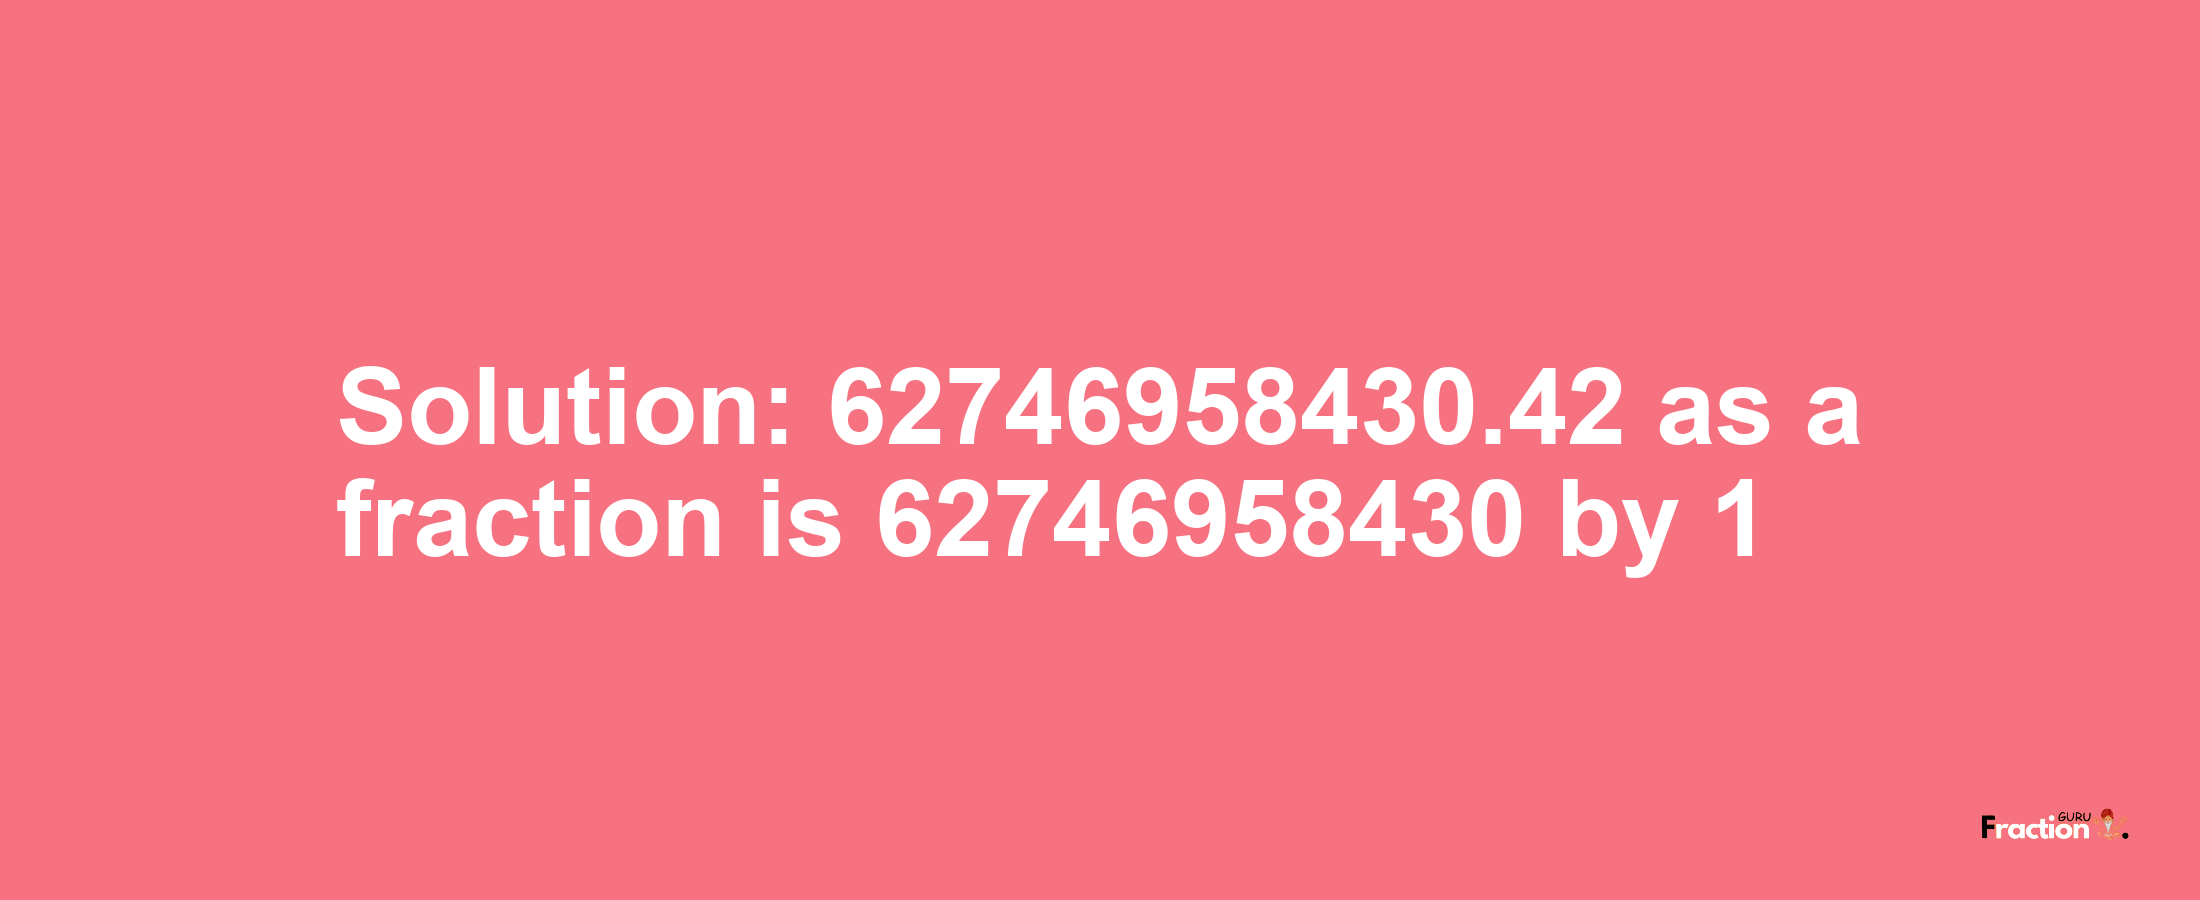 Solution:62746958430.42 as a fraction is 62746958430/1